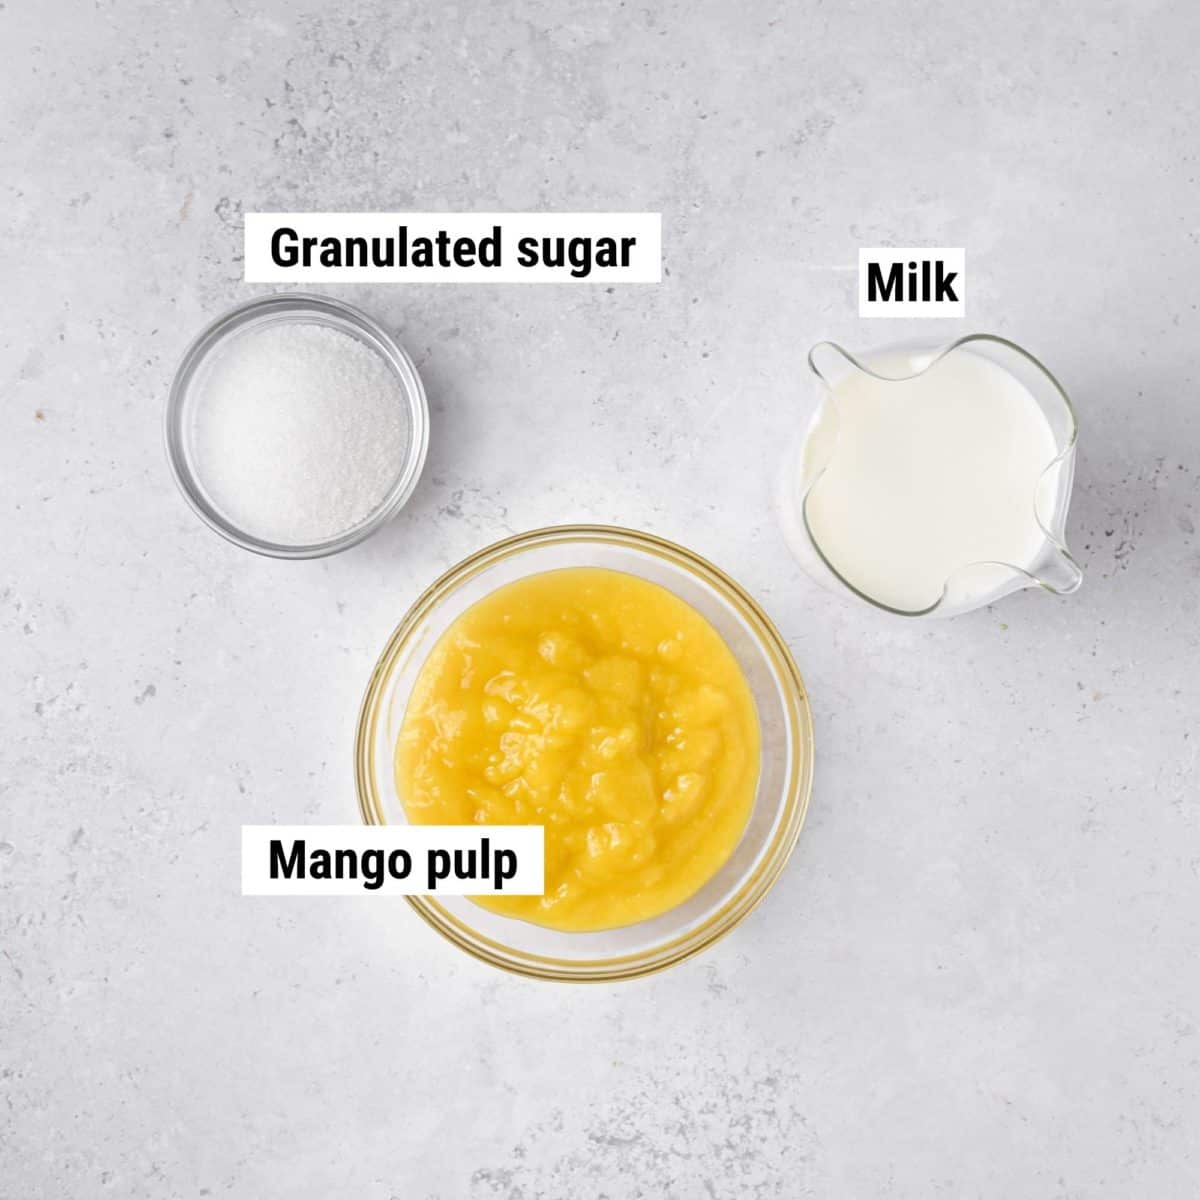 The ingredients used to make mango milkshakes laid out on a table.